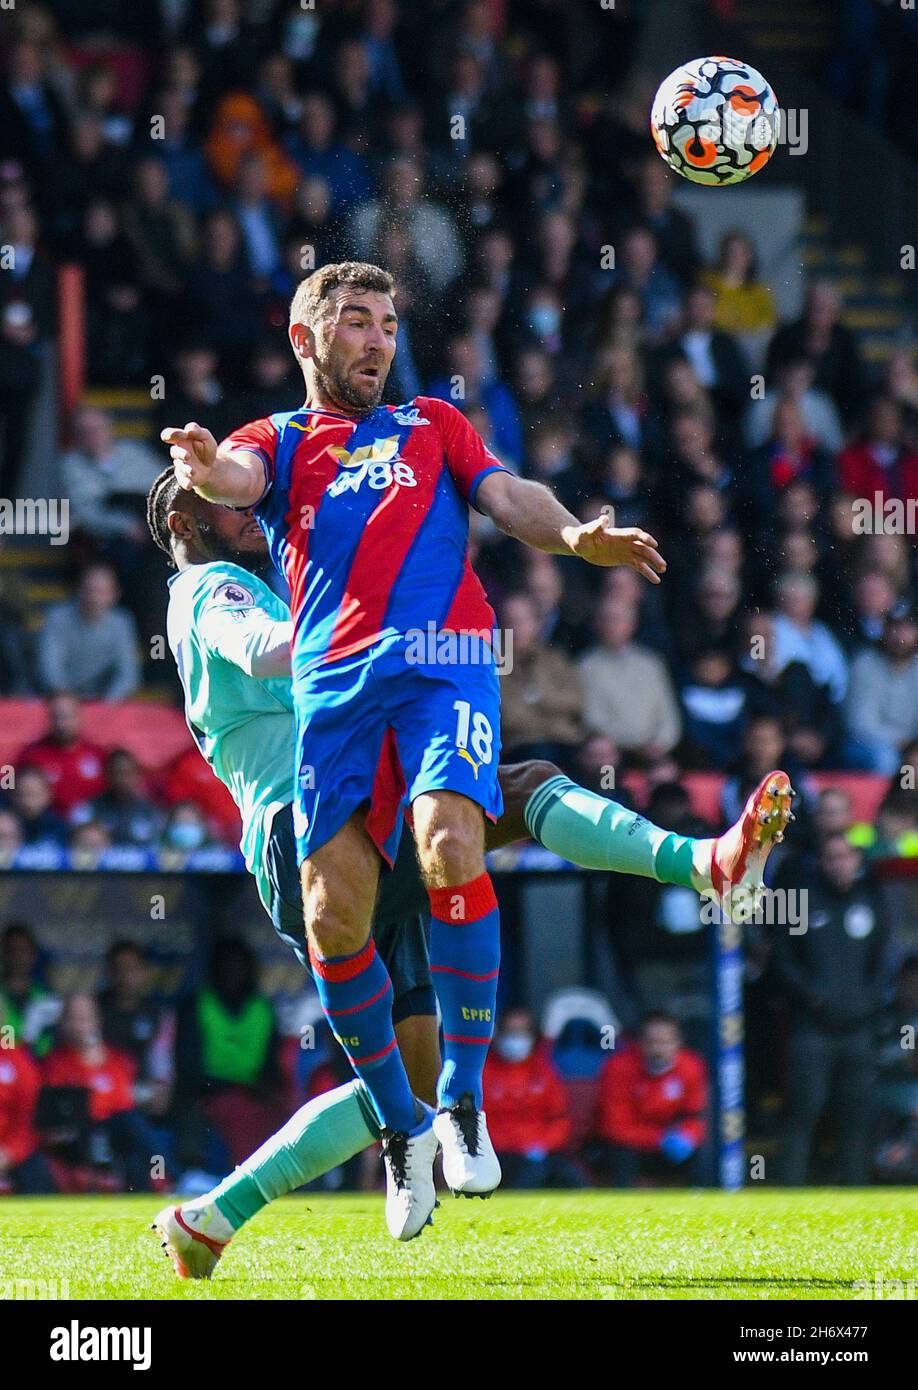 LONDON, ENGLAND - OCTOBER 3, 2021: James McFarlane McArthur of Palace pictured during the 2021-22 Premier League matchweek 7 game between Crystal Palace FC and Leicester CIty FC at Selhurst Park. Copyright: Cosmin Iftode/Picstaff Stock Photo